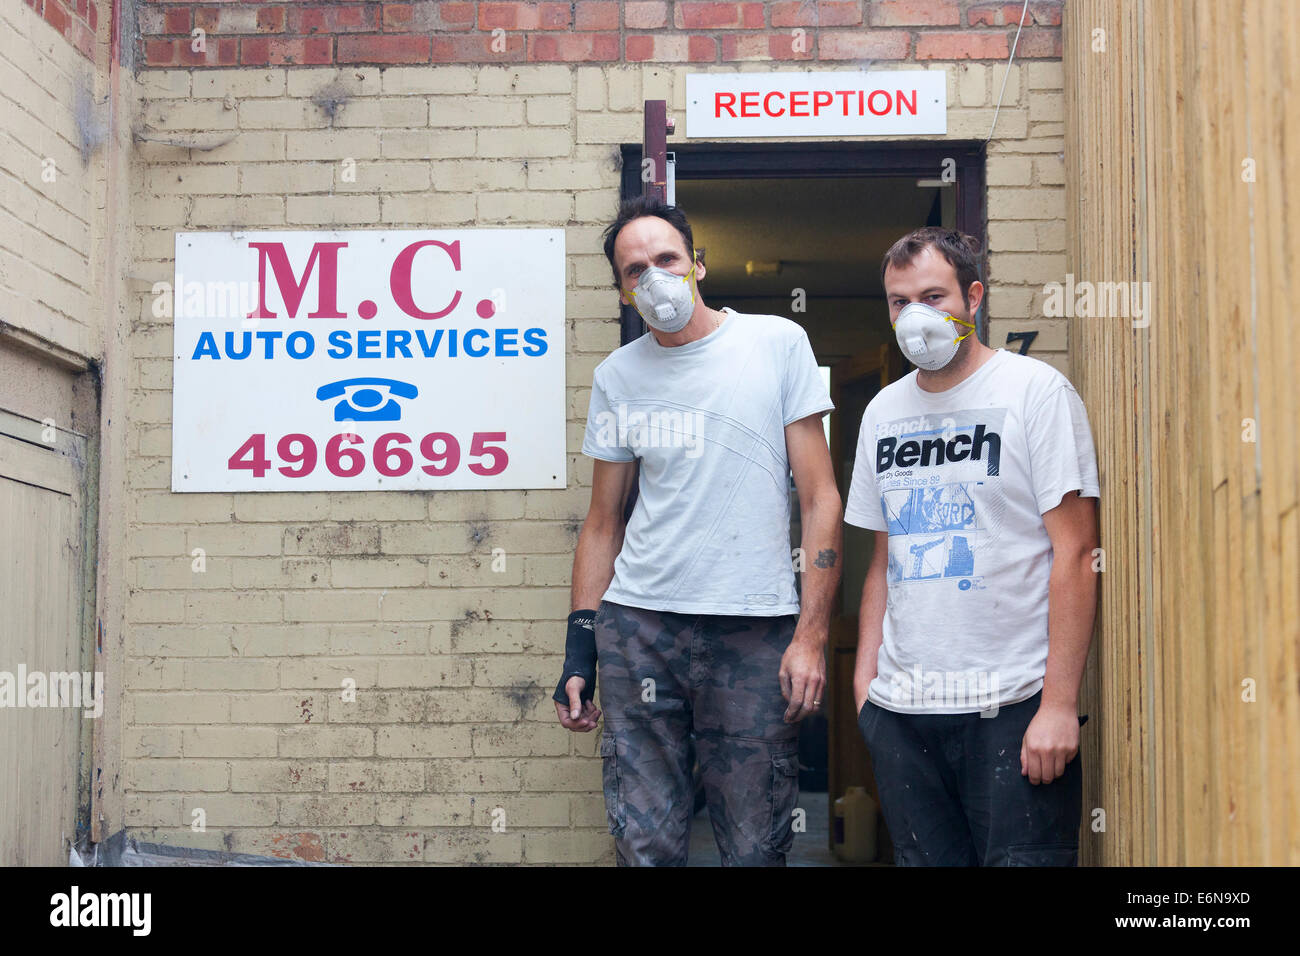 Marshgate, Swindon, Wiltshire, UK. 27 August 2014. Malcolm Curwen and son of M.C. Auto Services wear face masks in an attempt to minimise any toxic effects of the acrid smoke from the burning pile of waste at Averies Recycling, right next door to their business. The waste has been smouldering since 21 July 2014 and the fire is now being tackled by firefighters from Swindon, Marlborough, Royal Wooton Bassett and elsewhere in Wiltshire. Photograph Credit:  2014 John Henshall / Alamy Live News. JMH6382 Stock Photo